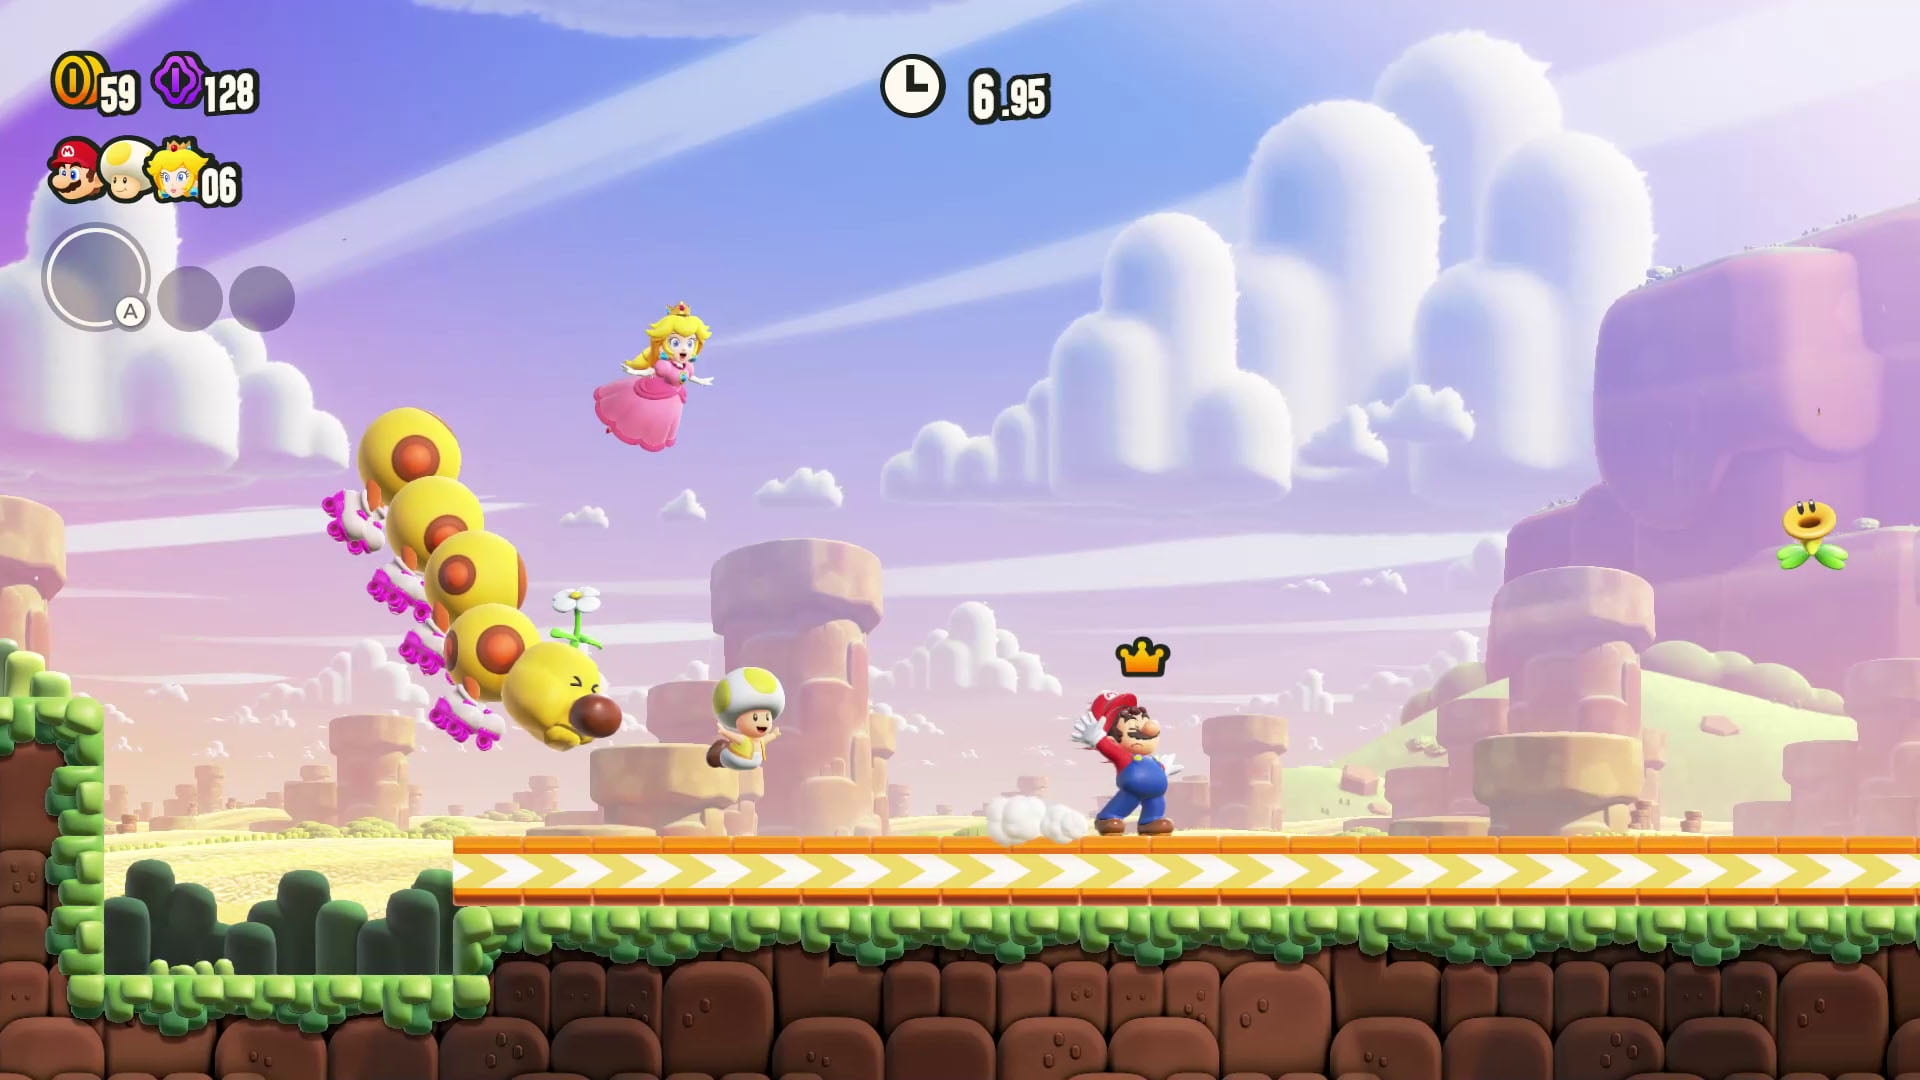 Super Mario Bros. Wonder': Pricing, Availability, Where to Buy